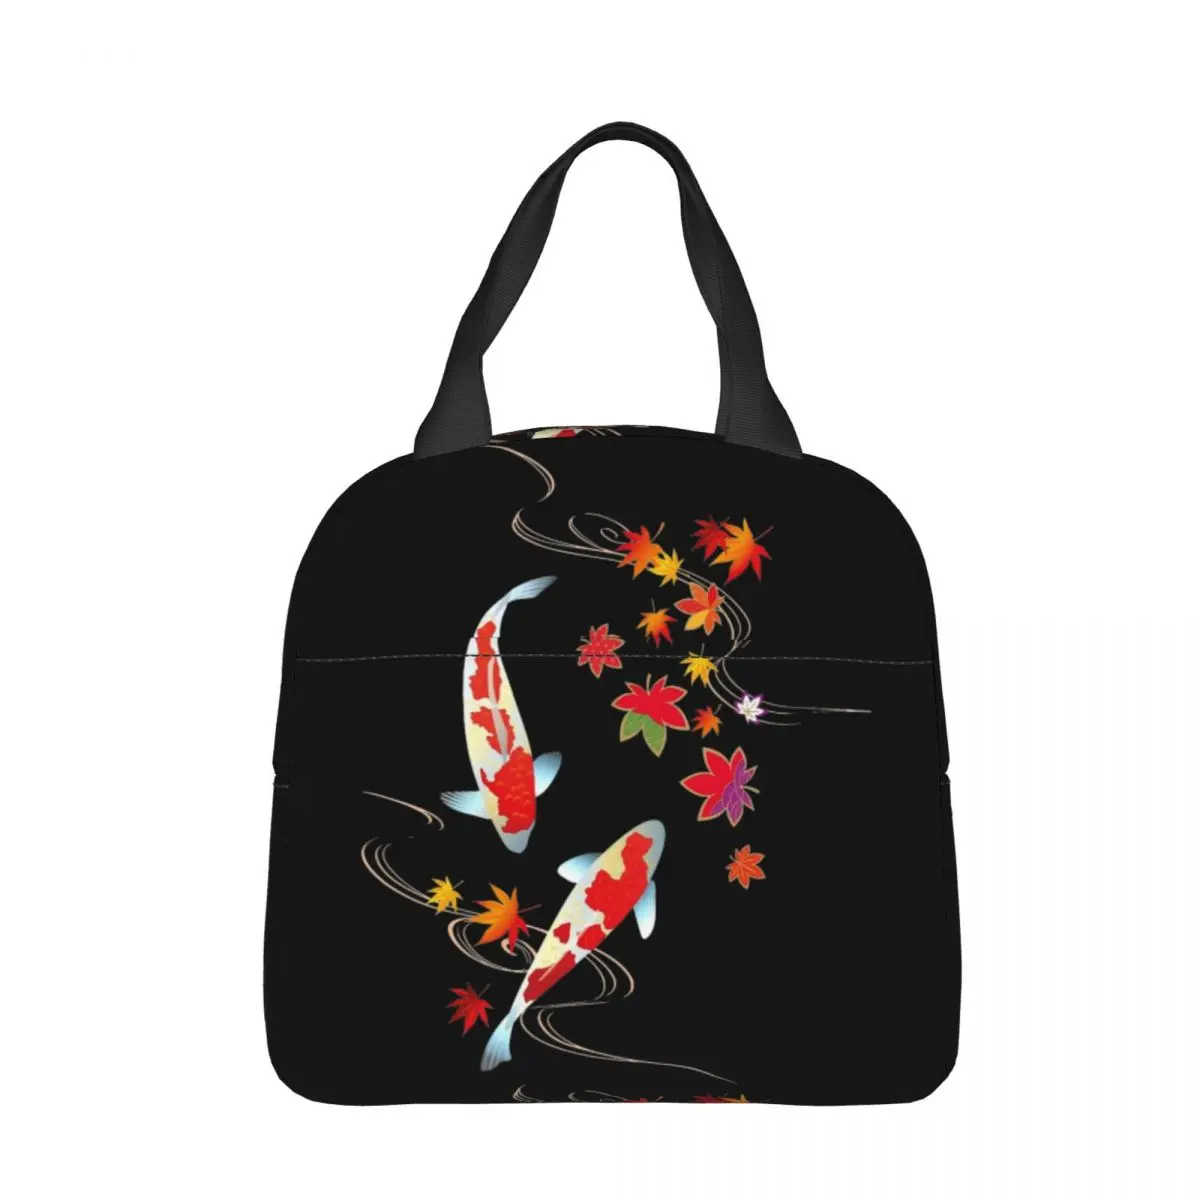 

Japanese Koi Fish Insulated Lunch Bag High Capacity Autumn Leaves Meal Container Cooler Bag Tote Lunch Box Travel Men Women